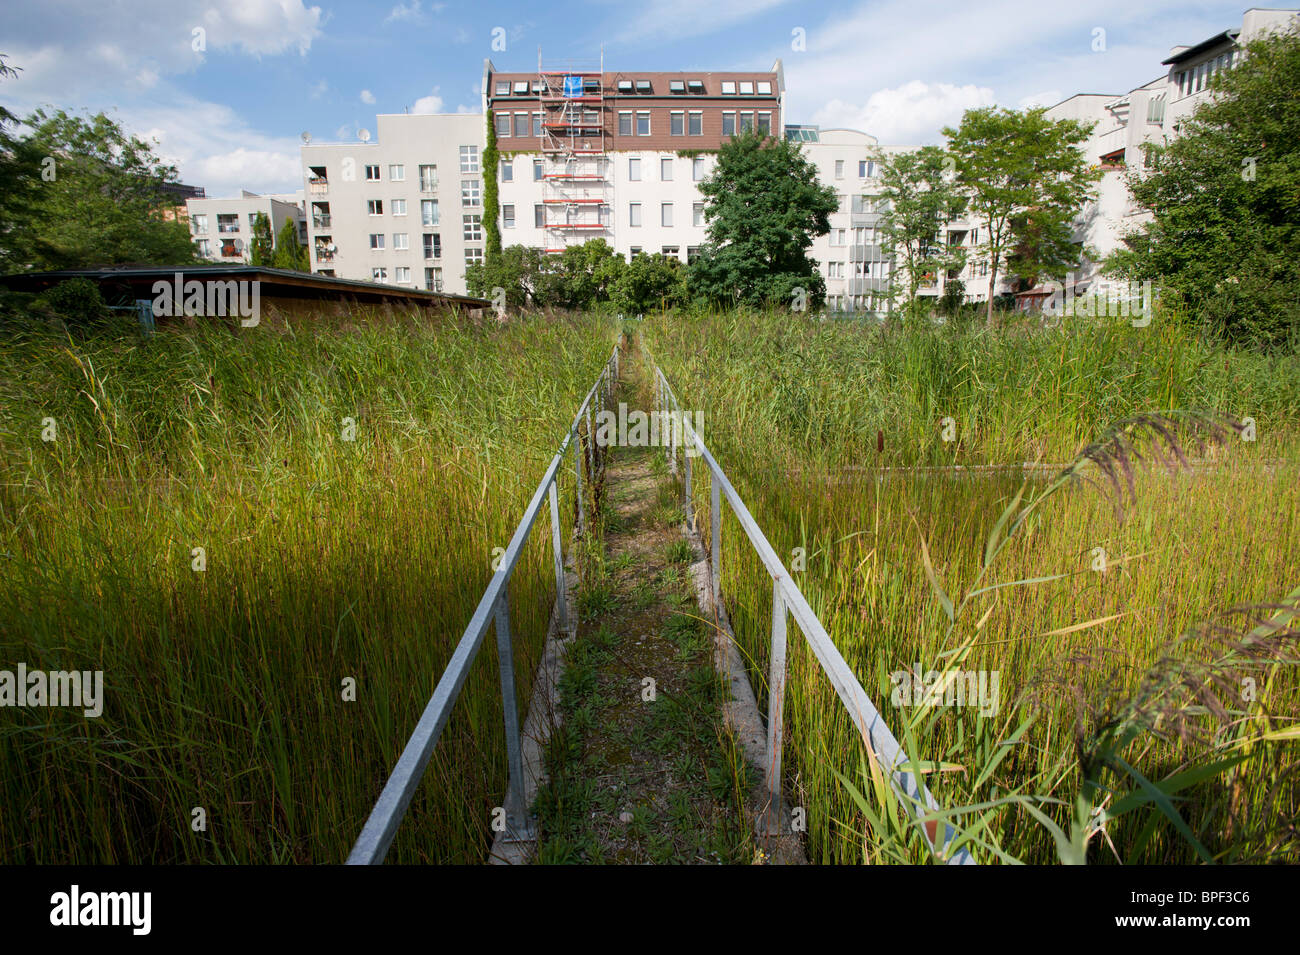 Reed beds treating domestic wastewater from apartment buildings in Mitte district of Berlin Germany Stock Photo